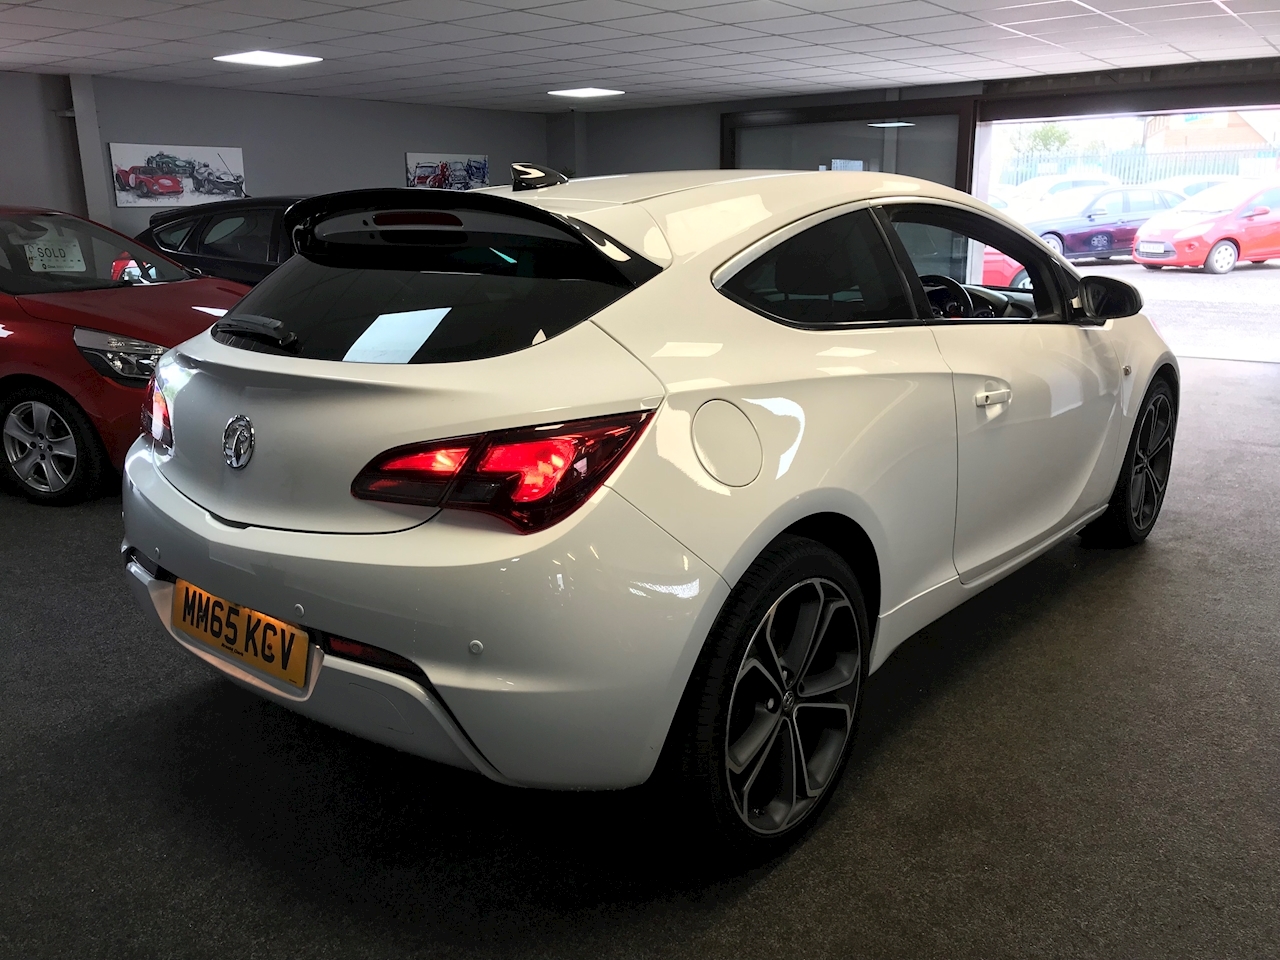 Astra Gtc Limited Edition S/S Hatchback 1.4 Manual Petrol